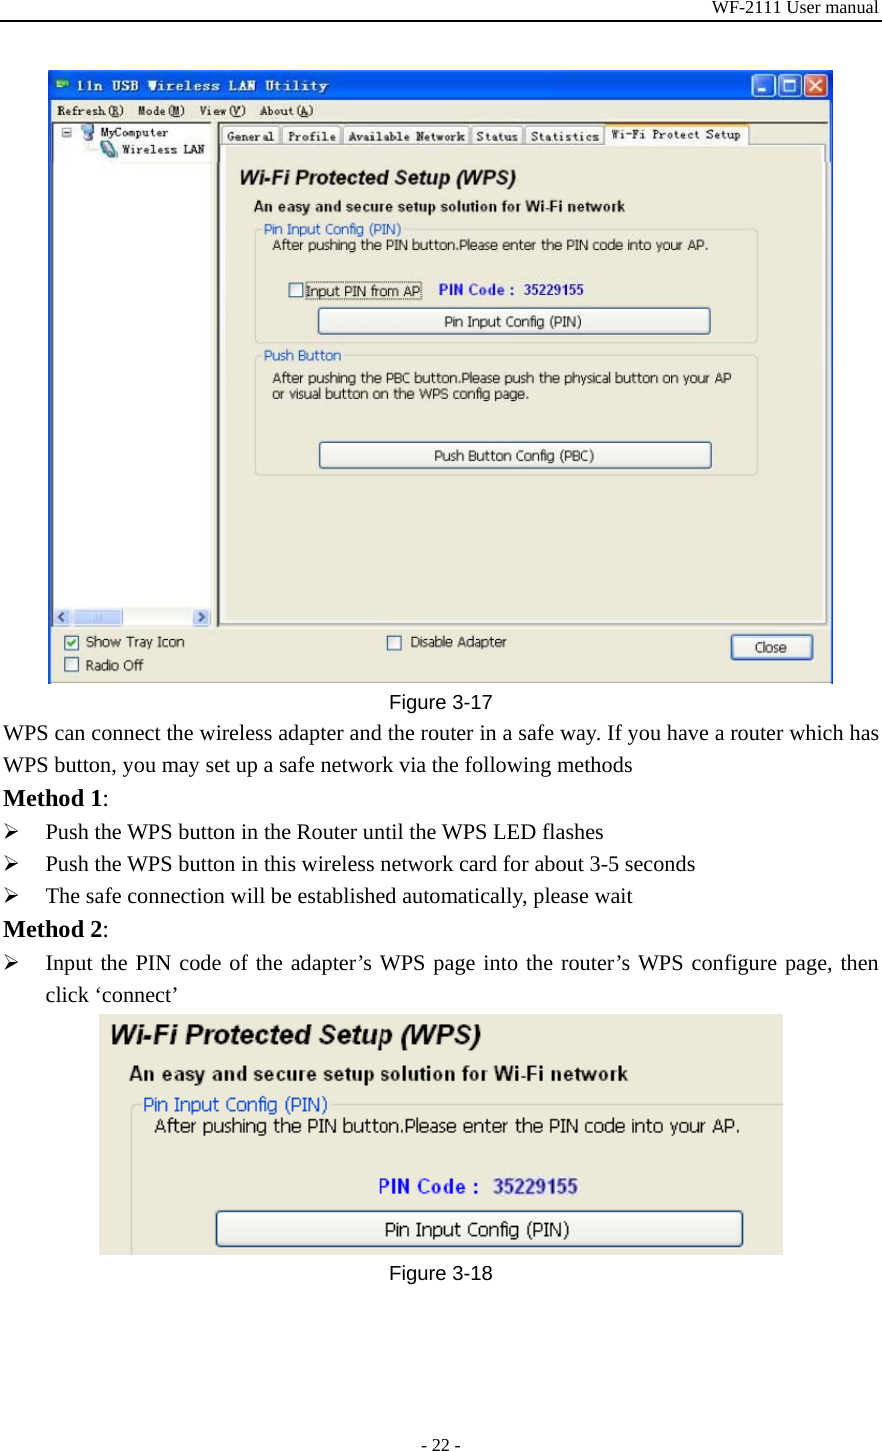 WF-2111 User manual - 22 -  Figure 3-17 WPS can connect the wireless adapter and the router in a safe way. If you have a router which has WPS button, you may set up a safe network via the following methods Method 1: ¾ Push the WPS button in the Router until the WPS LED flashes ¾ Push the WPS button in this wireless network card for about 3-5 seconds ¾ The safe connection will be established automatically, please wait Method 2: ¾ Input the PIN code of the adapter’s WPS page into the router’s WPS configure page, then click ‘connect’  Figure 3-18 